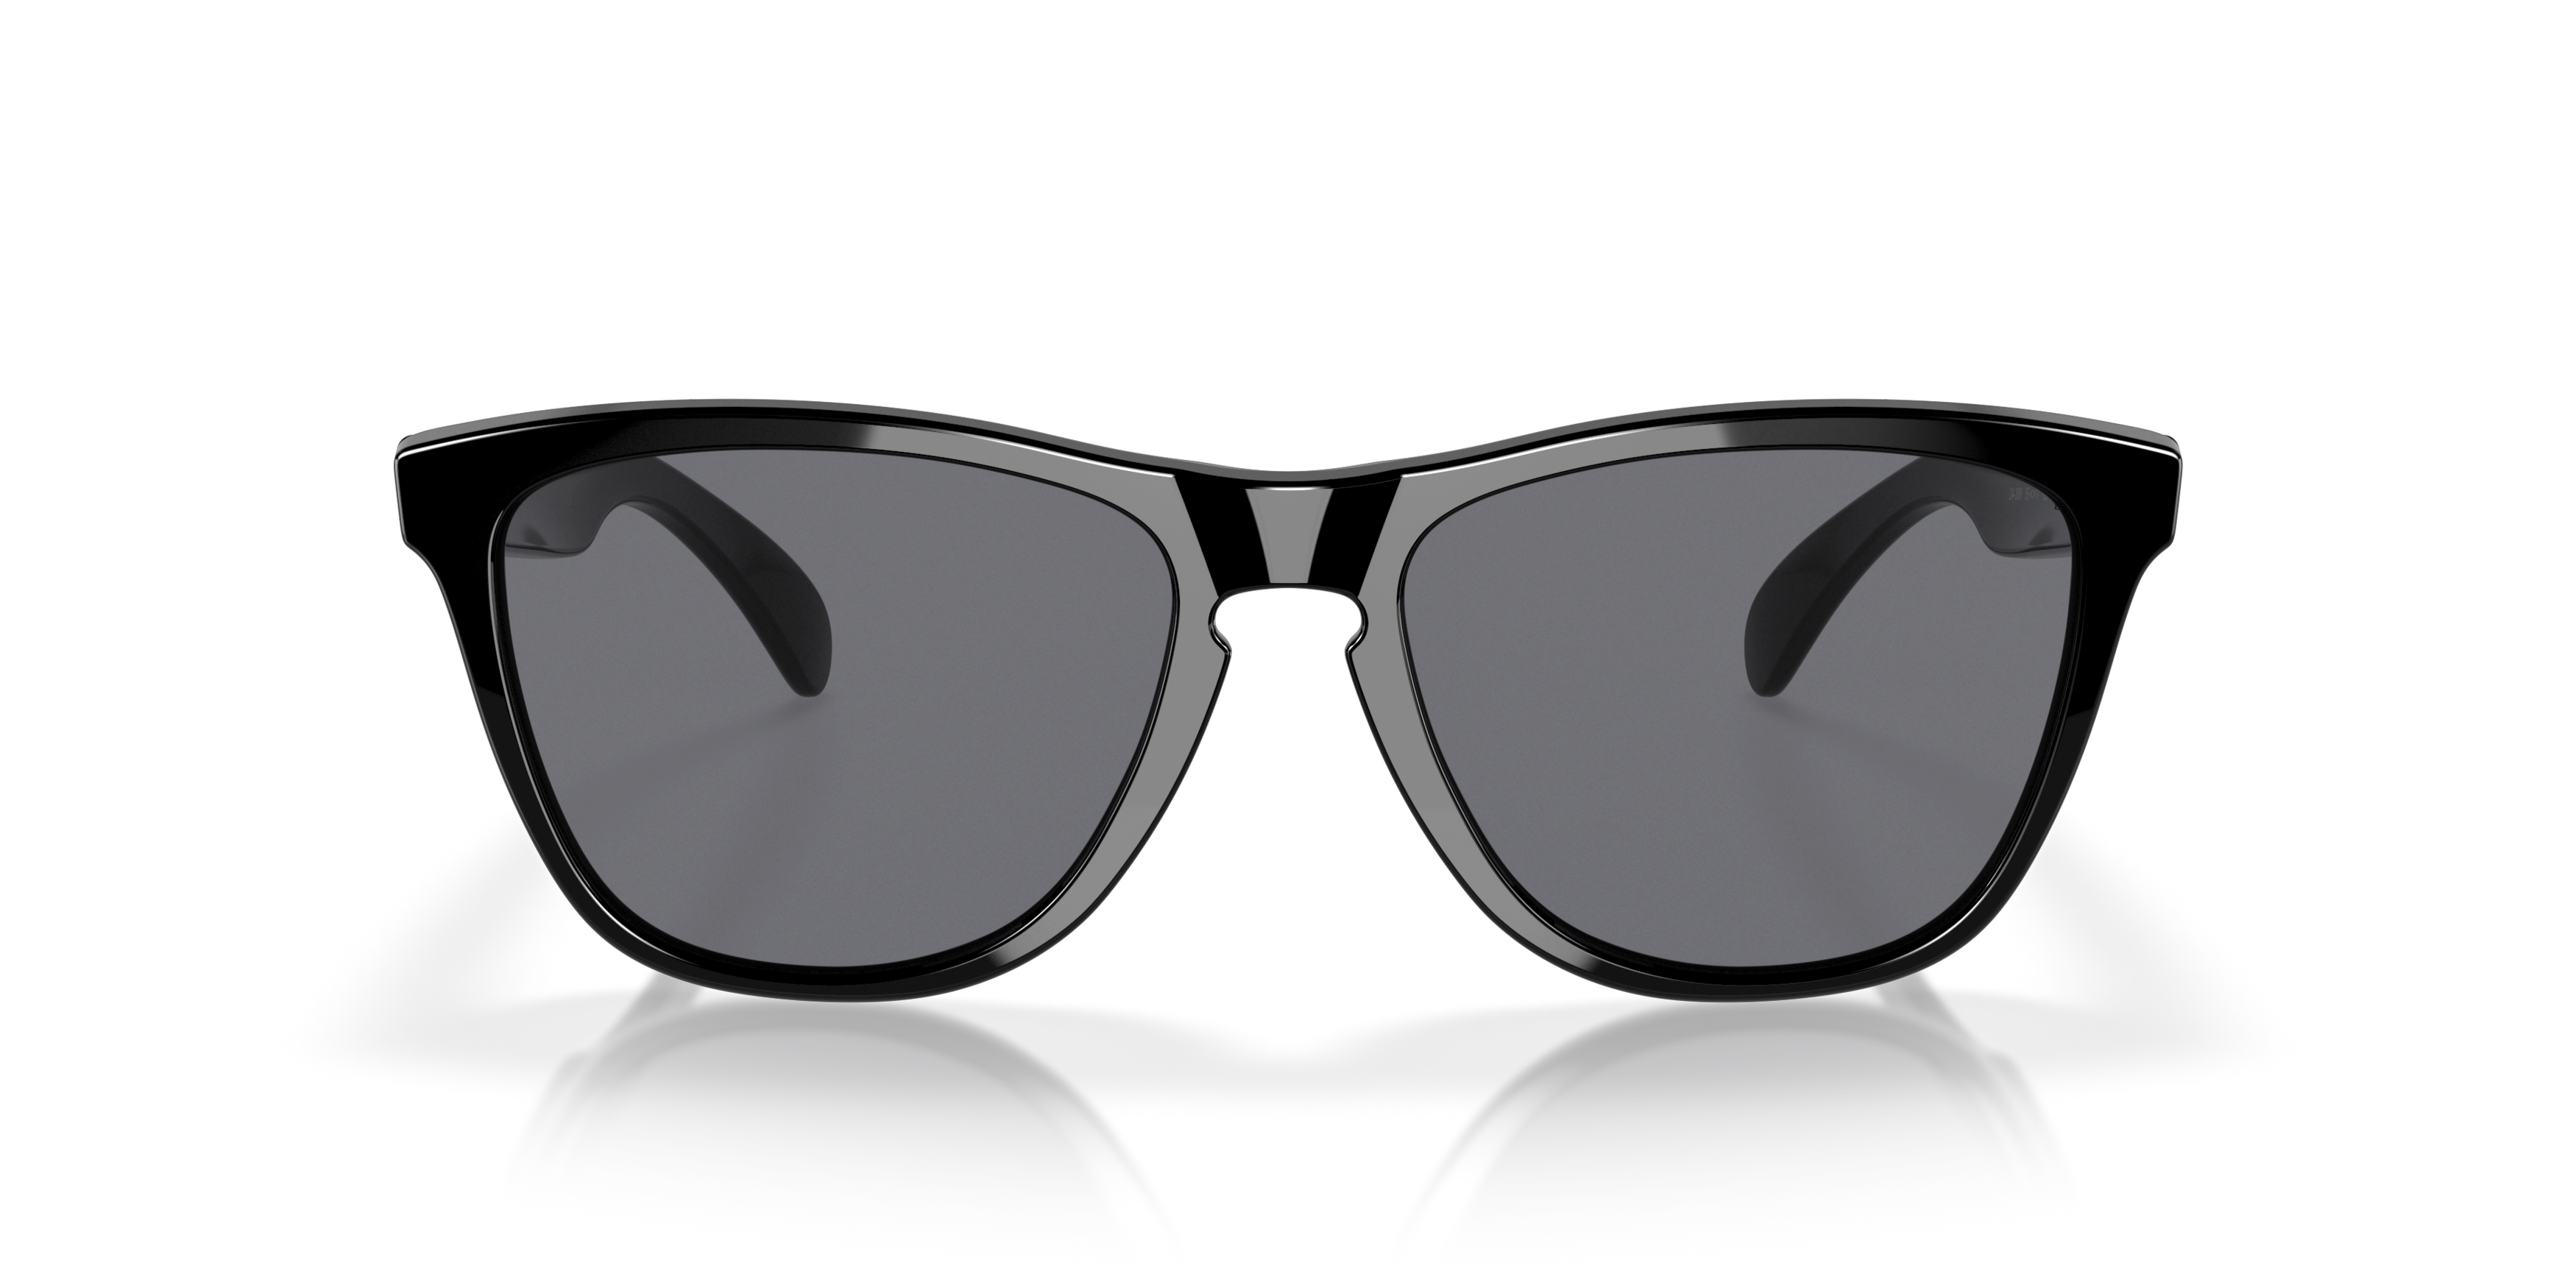 [products.image.front] Oakley